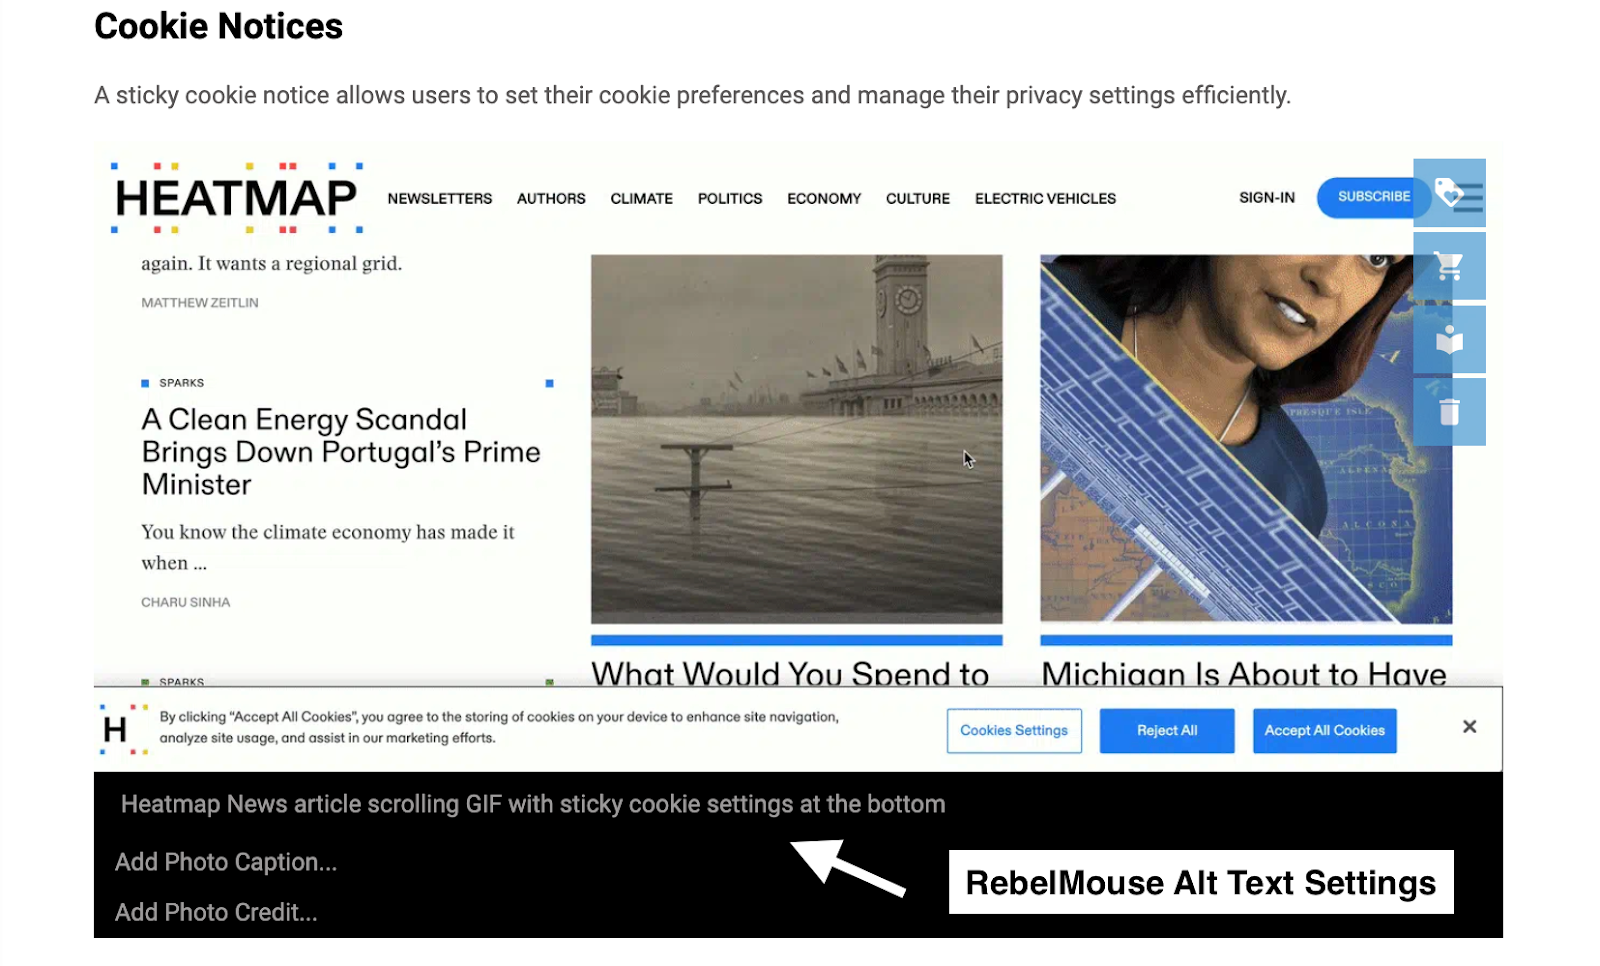 example of RebelMouse alt text image optimization settings in CMS